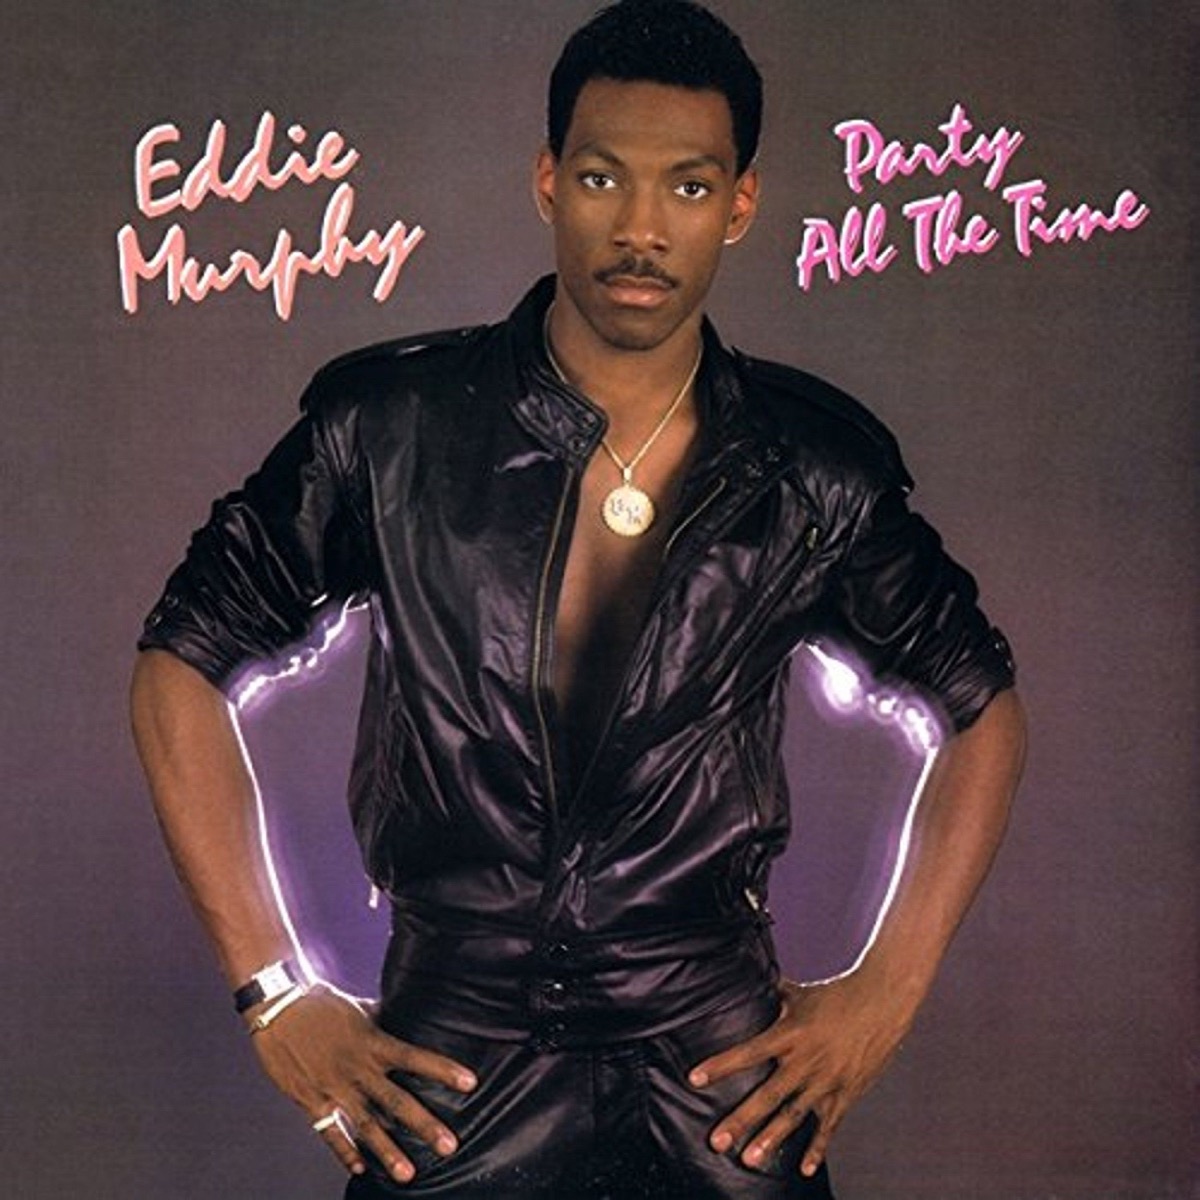 Eddie Murphy Party All the Time album cover